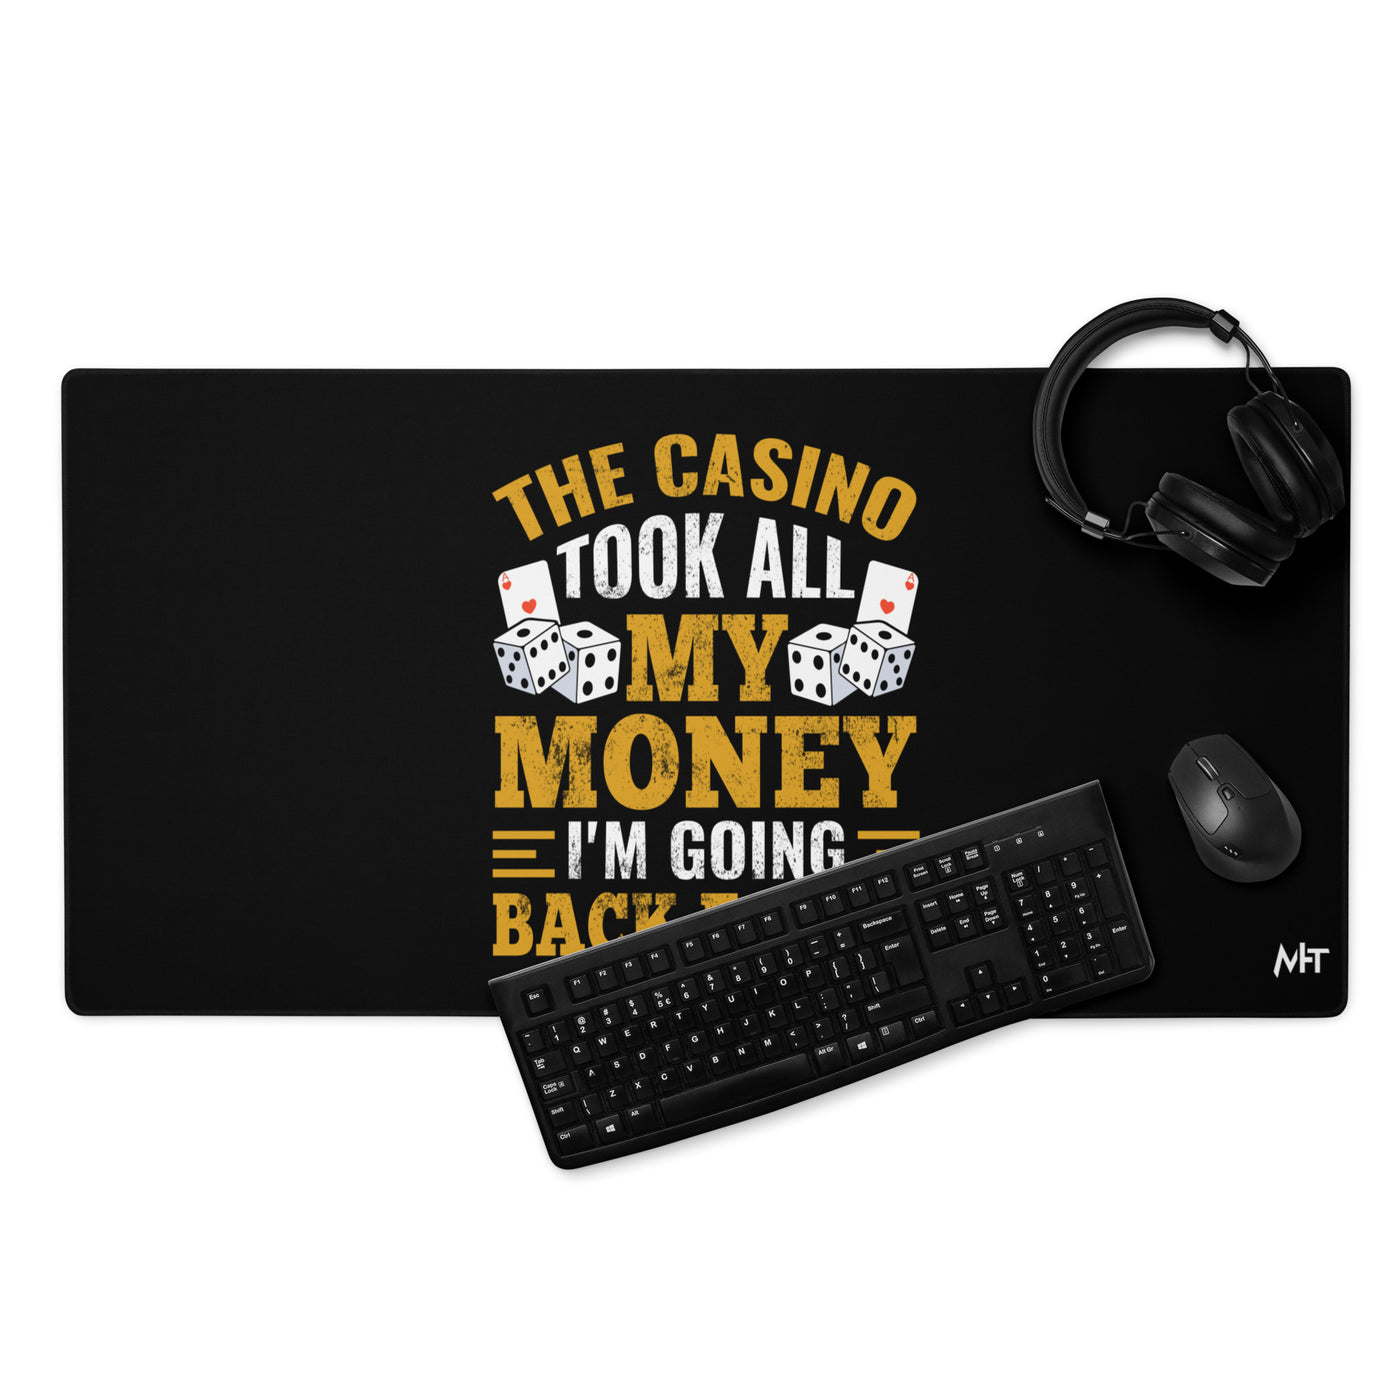 The Casino Took all my money, I am Going back for it - Desk Mat